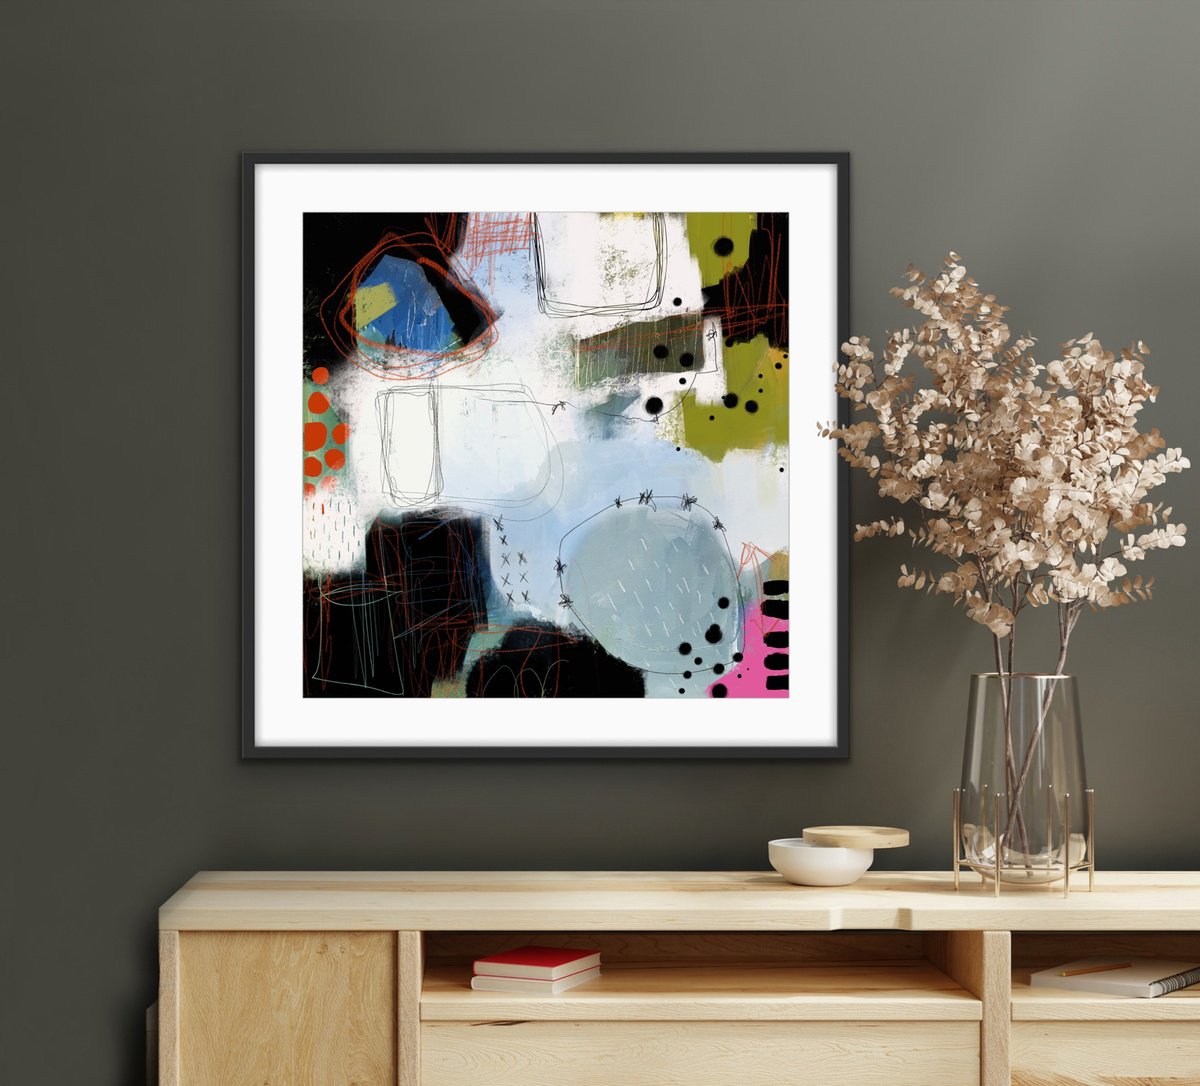 Follow your dream (24 x 24) - Abstract artwork - Limited edition of 5 by Chantal Proulx